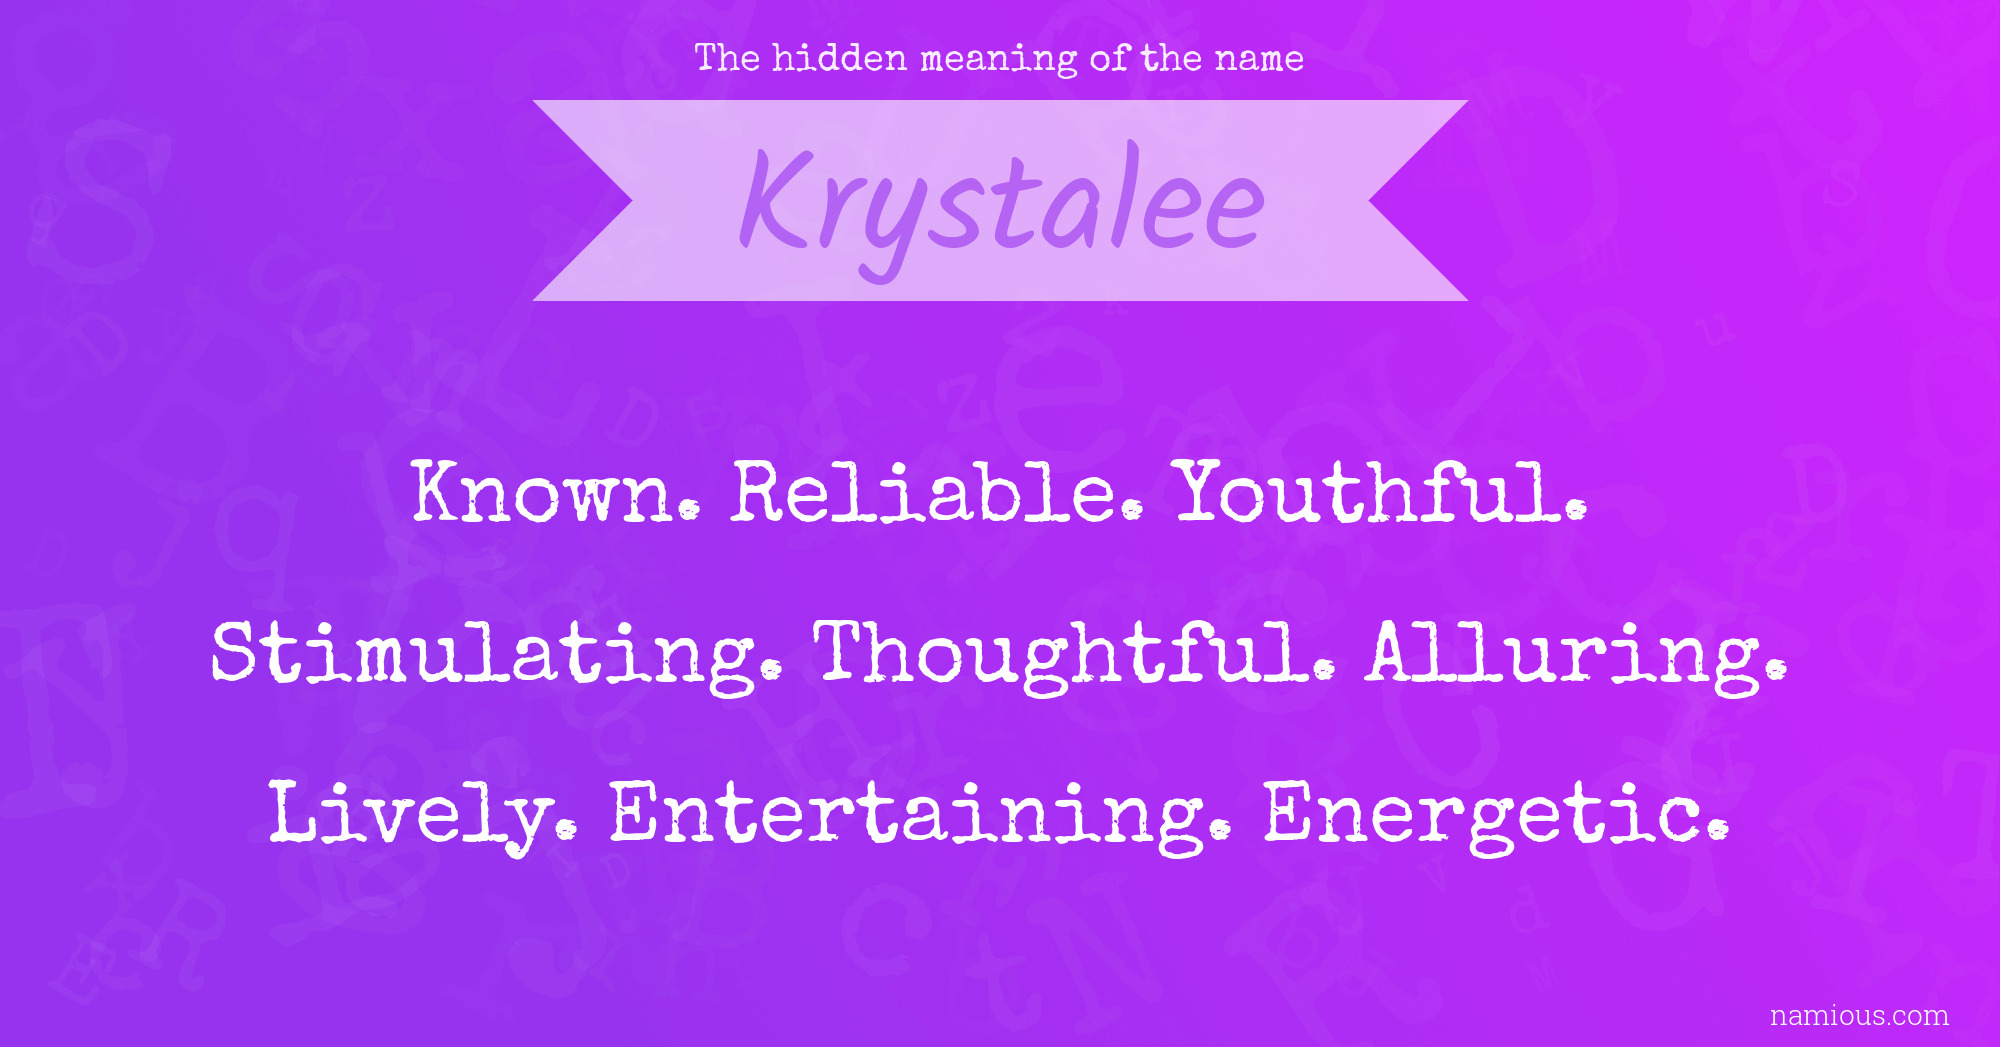 The hidden meaning of the name Krystalee